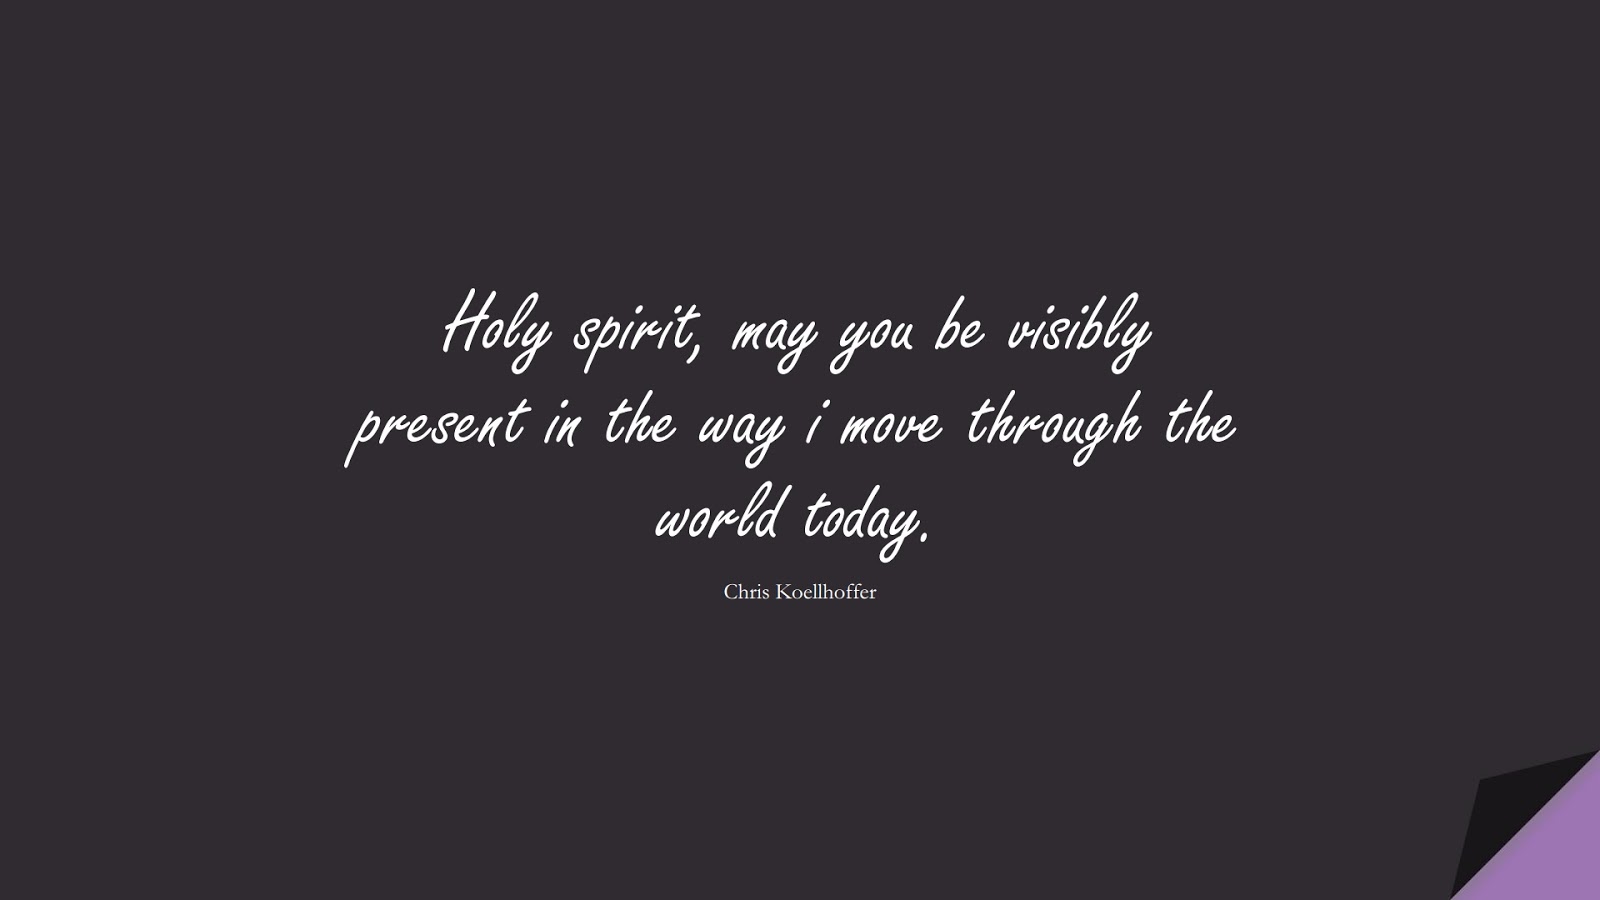 Holy spirit, may you be visibly present in the way i move through the world today. (Chris Koellhoffer);  #SpiritQuotes